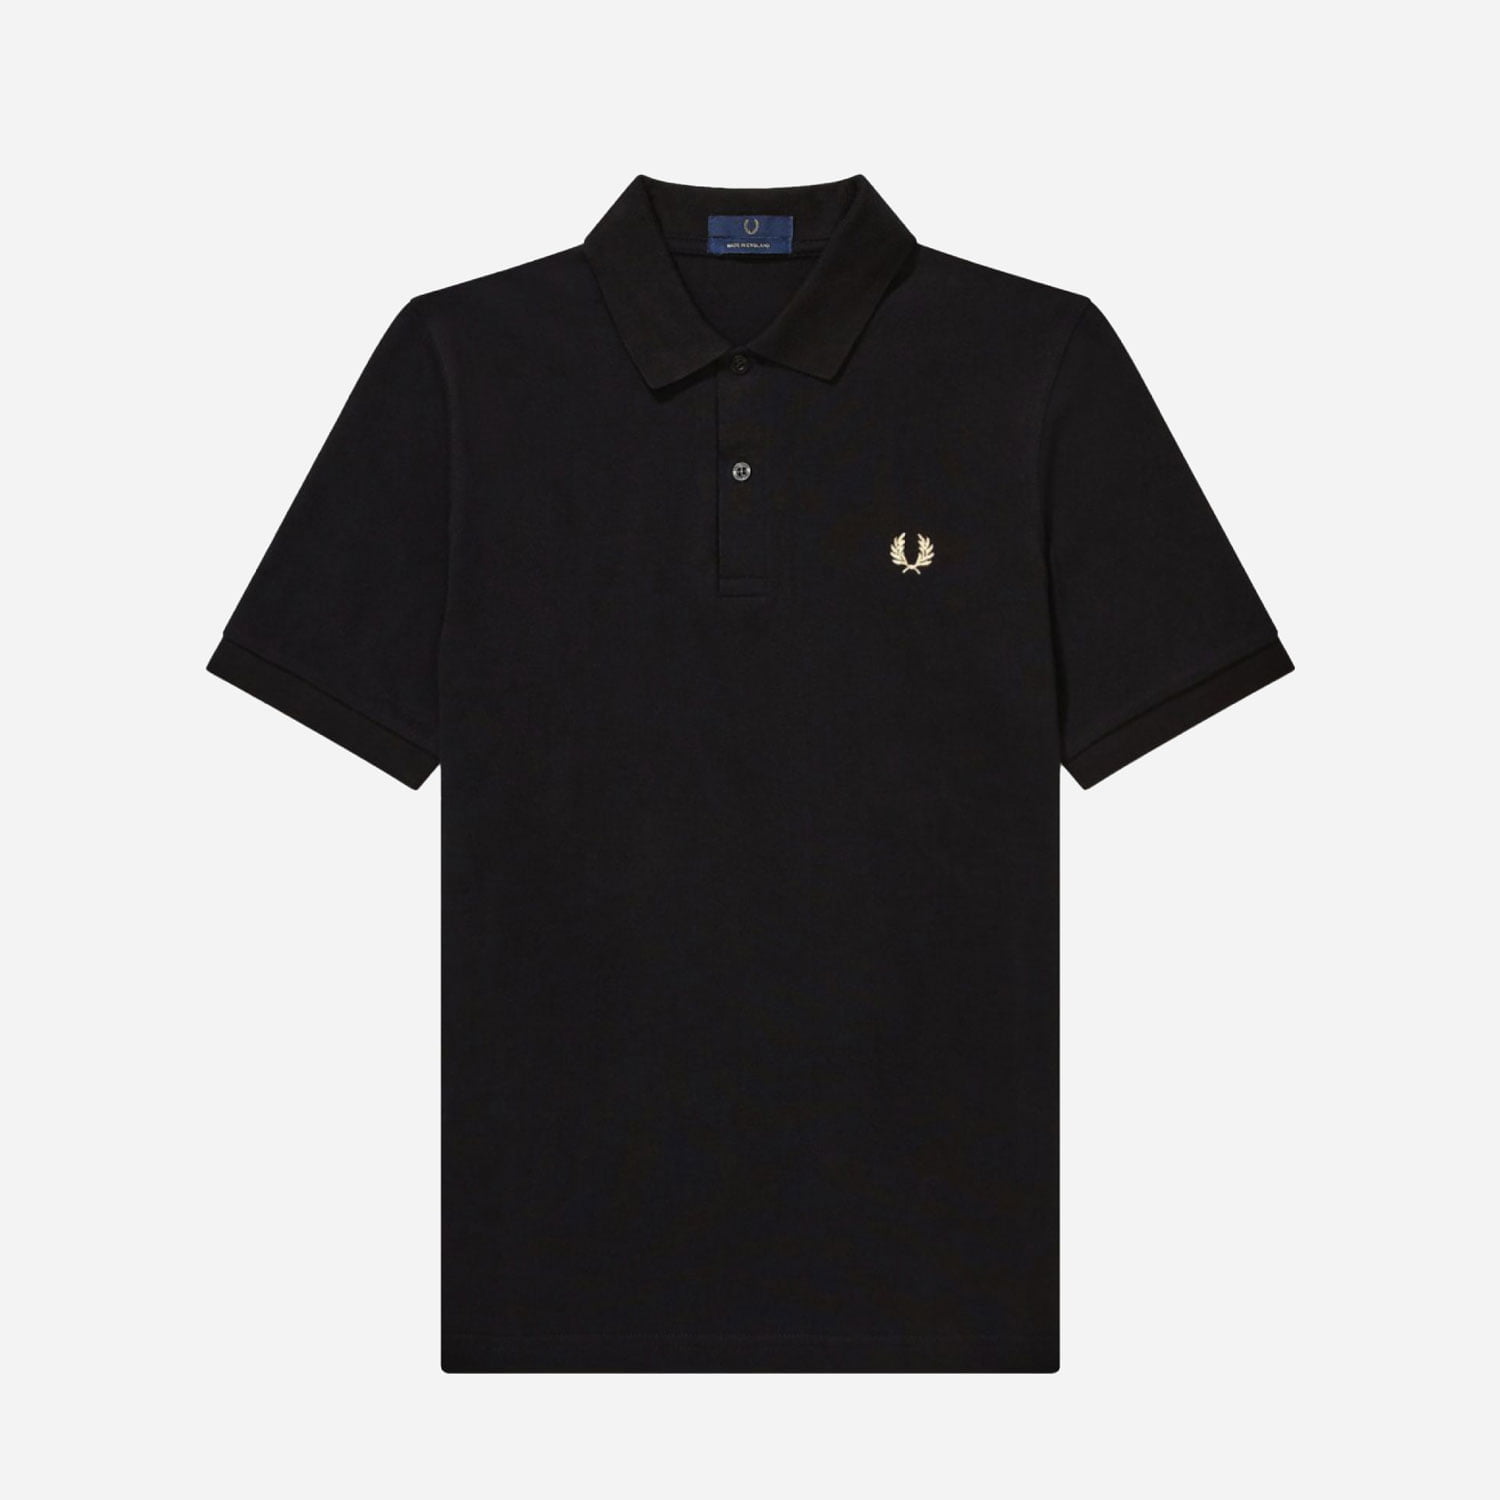 Fred Perry The Original Shirt - Black/Champagne